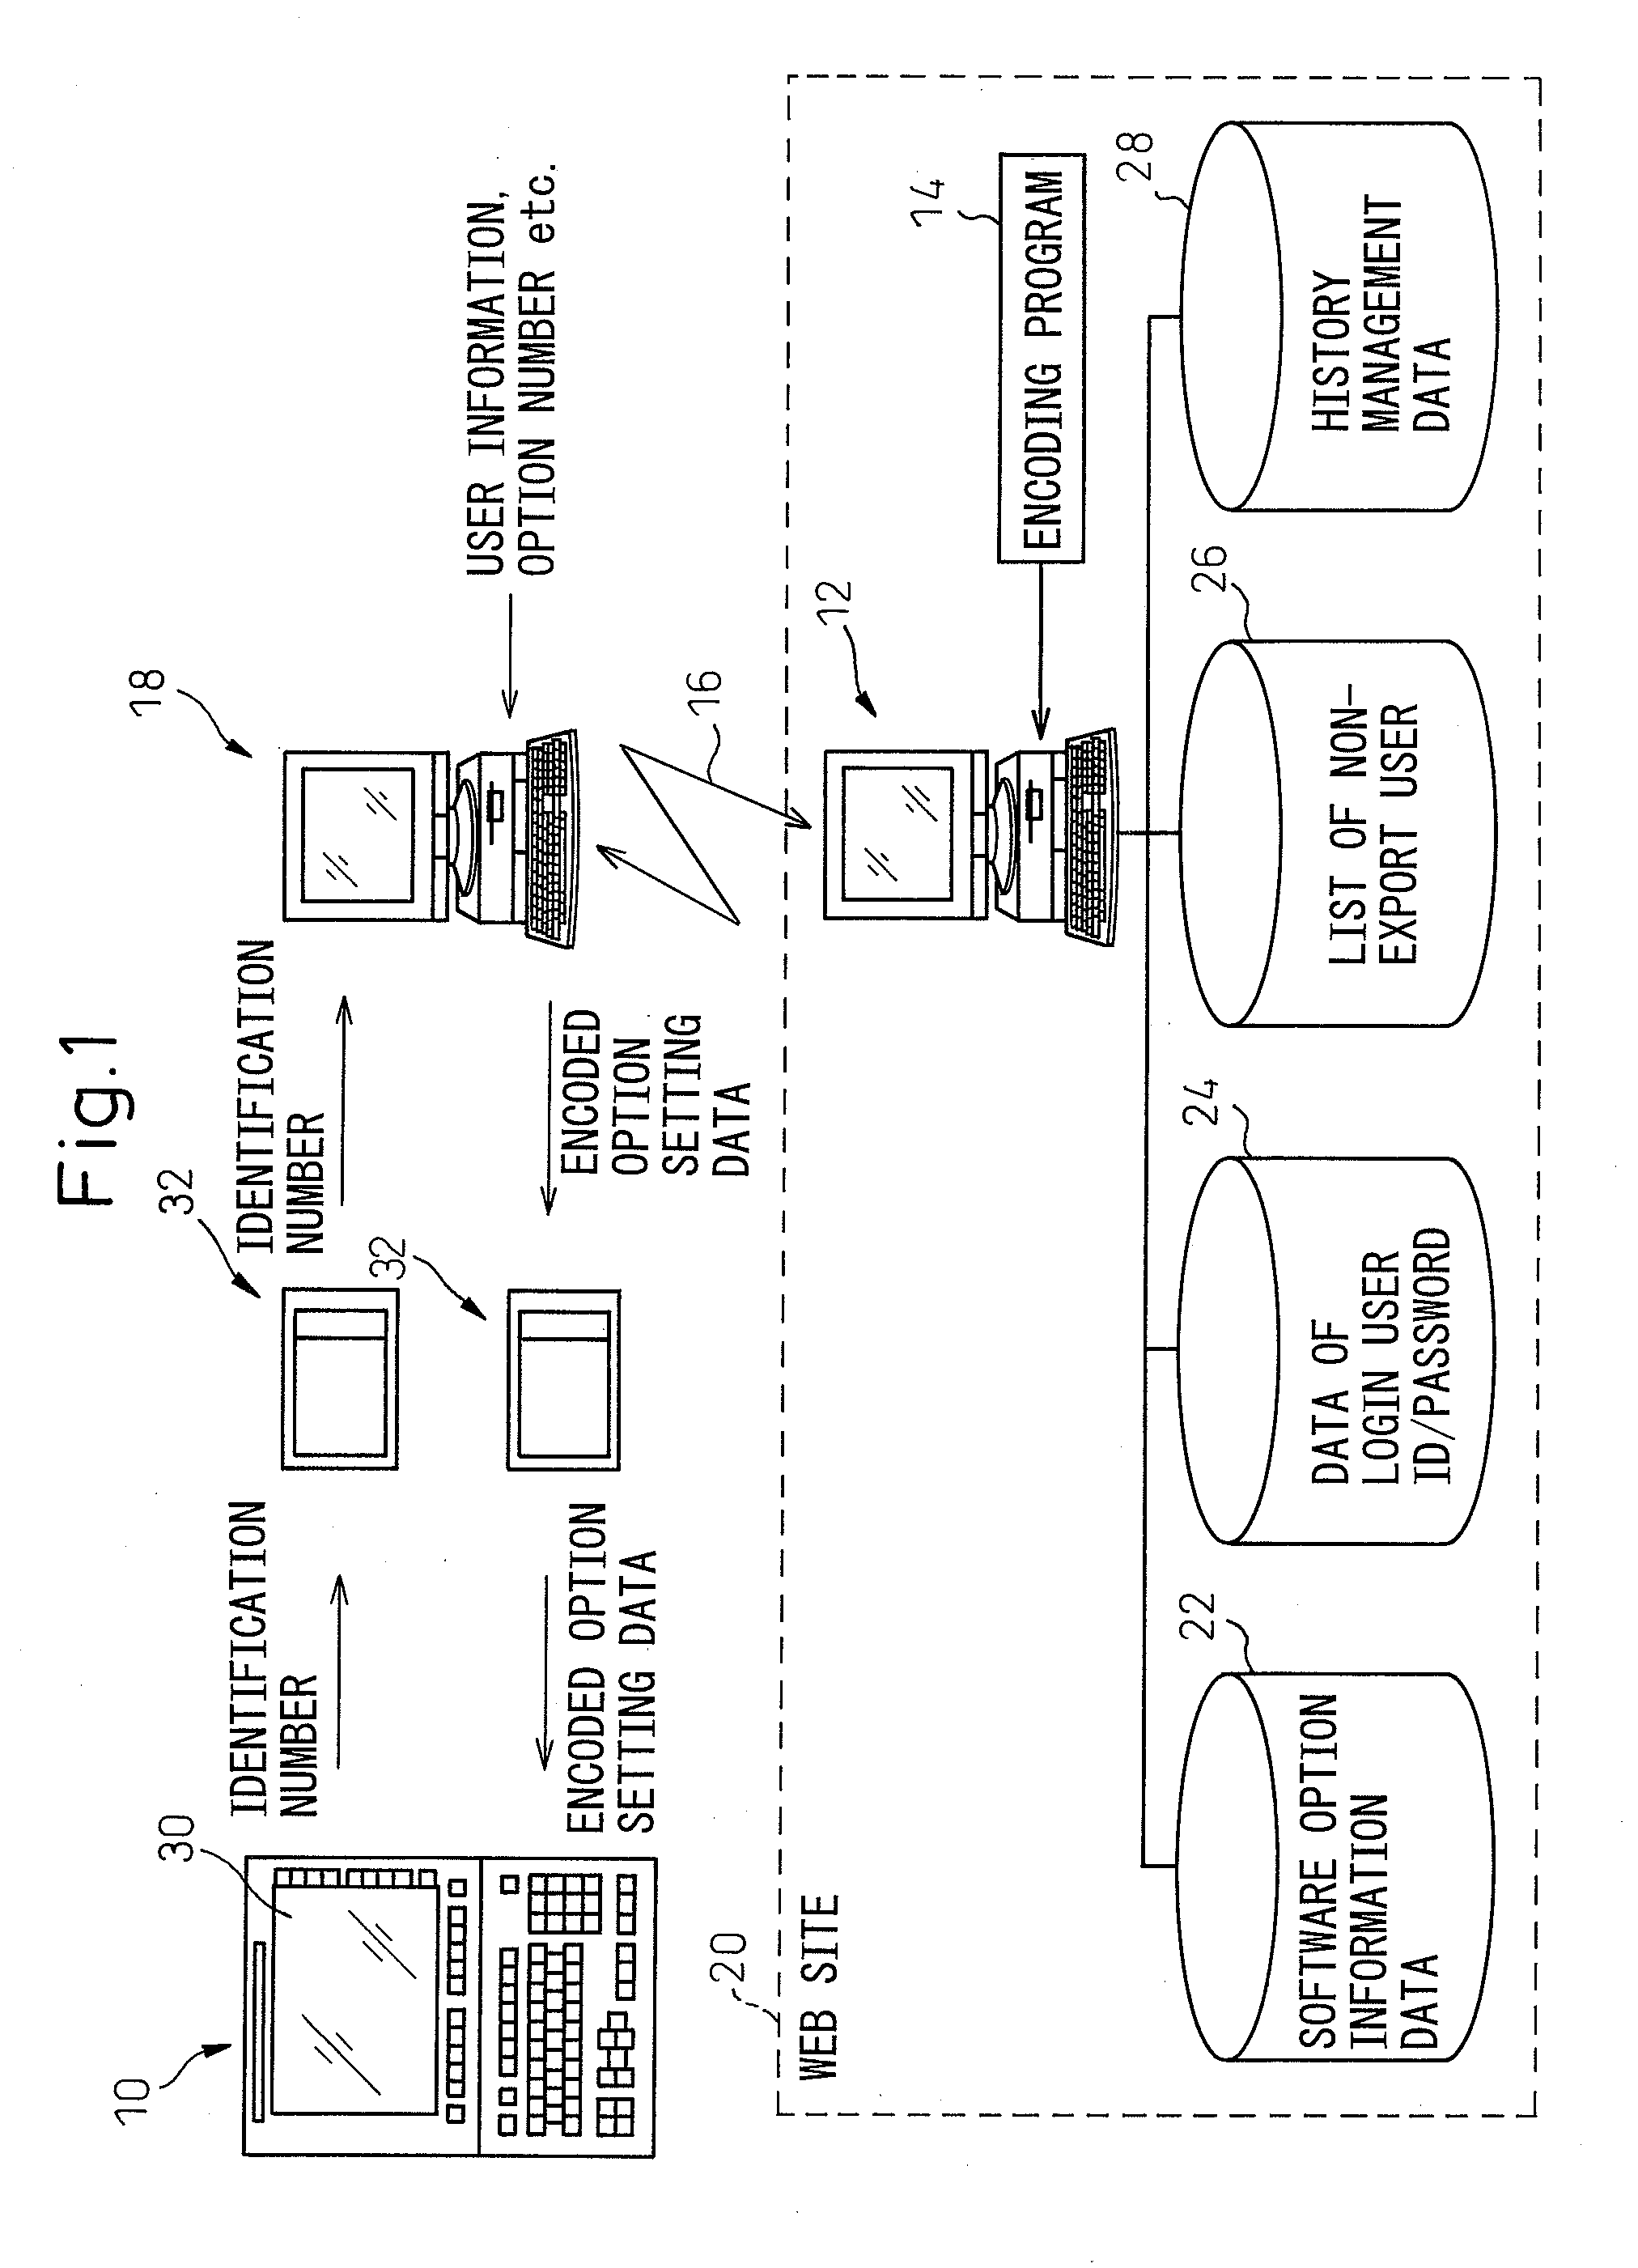 System and method for setting software option of numeric control device